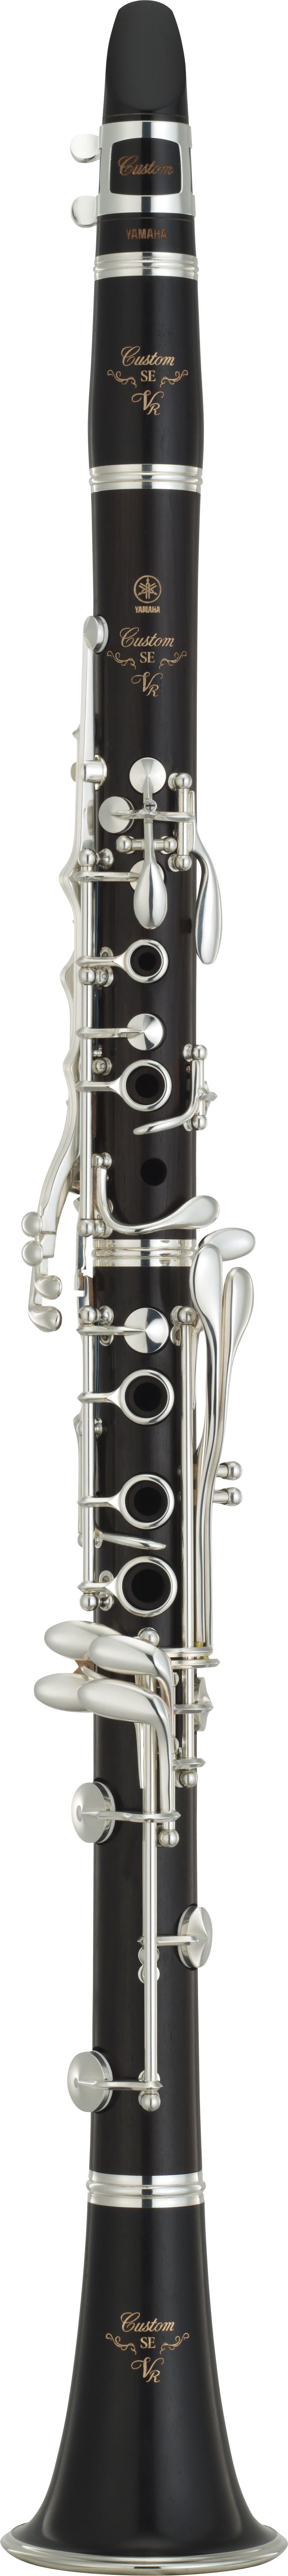 YCL-SEVR/SEVR-A - Overview - Clarinets - Brass & Woodwinds